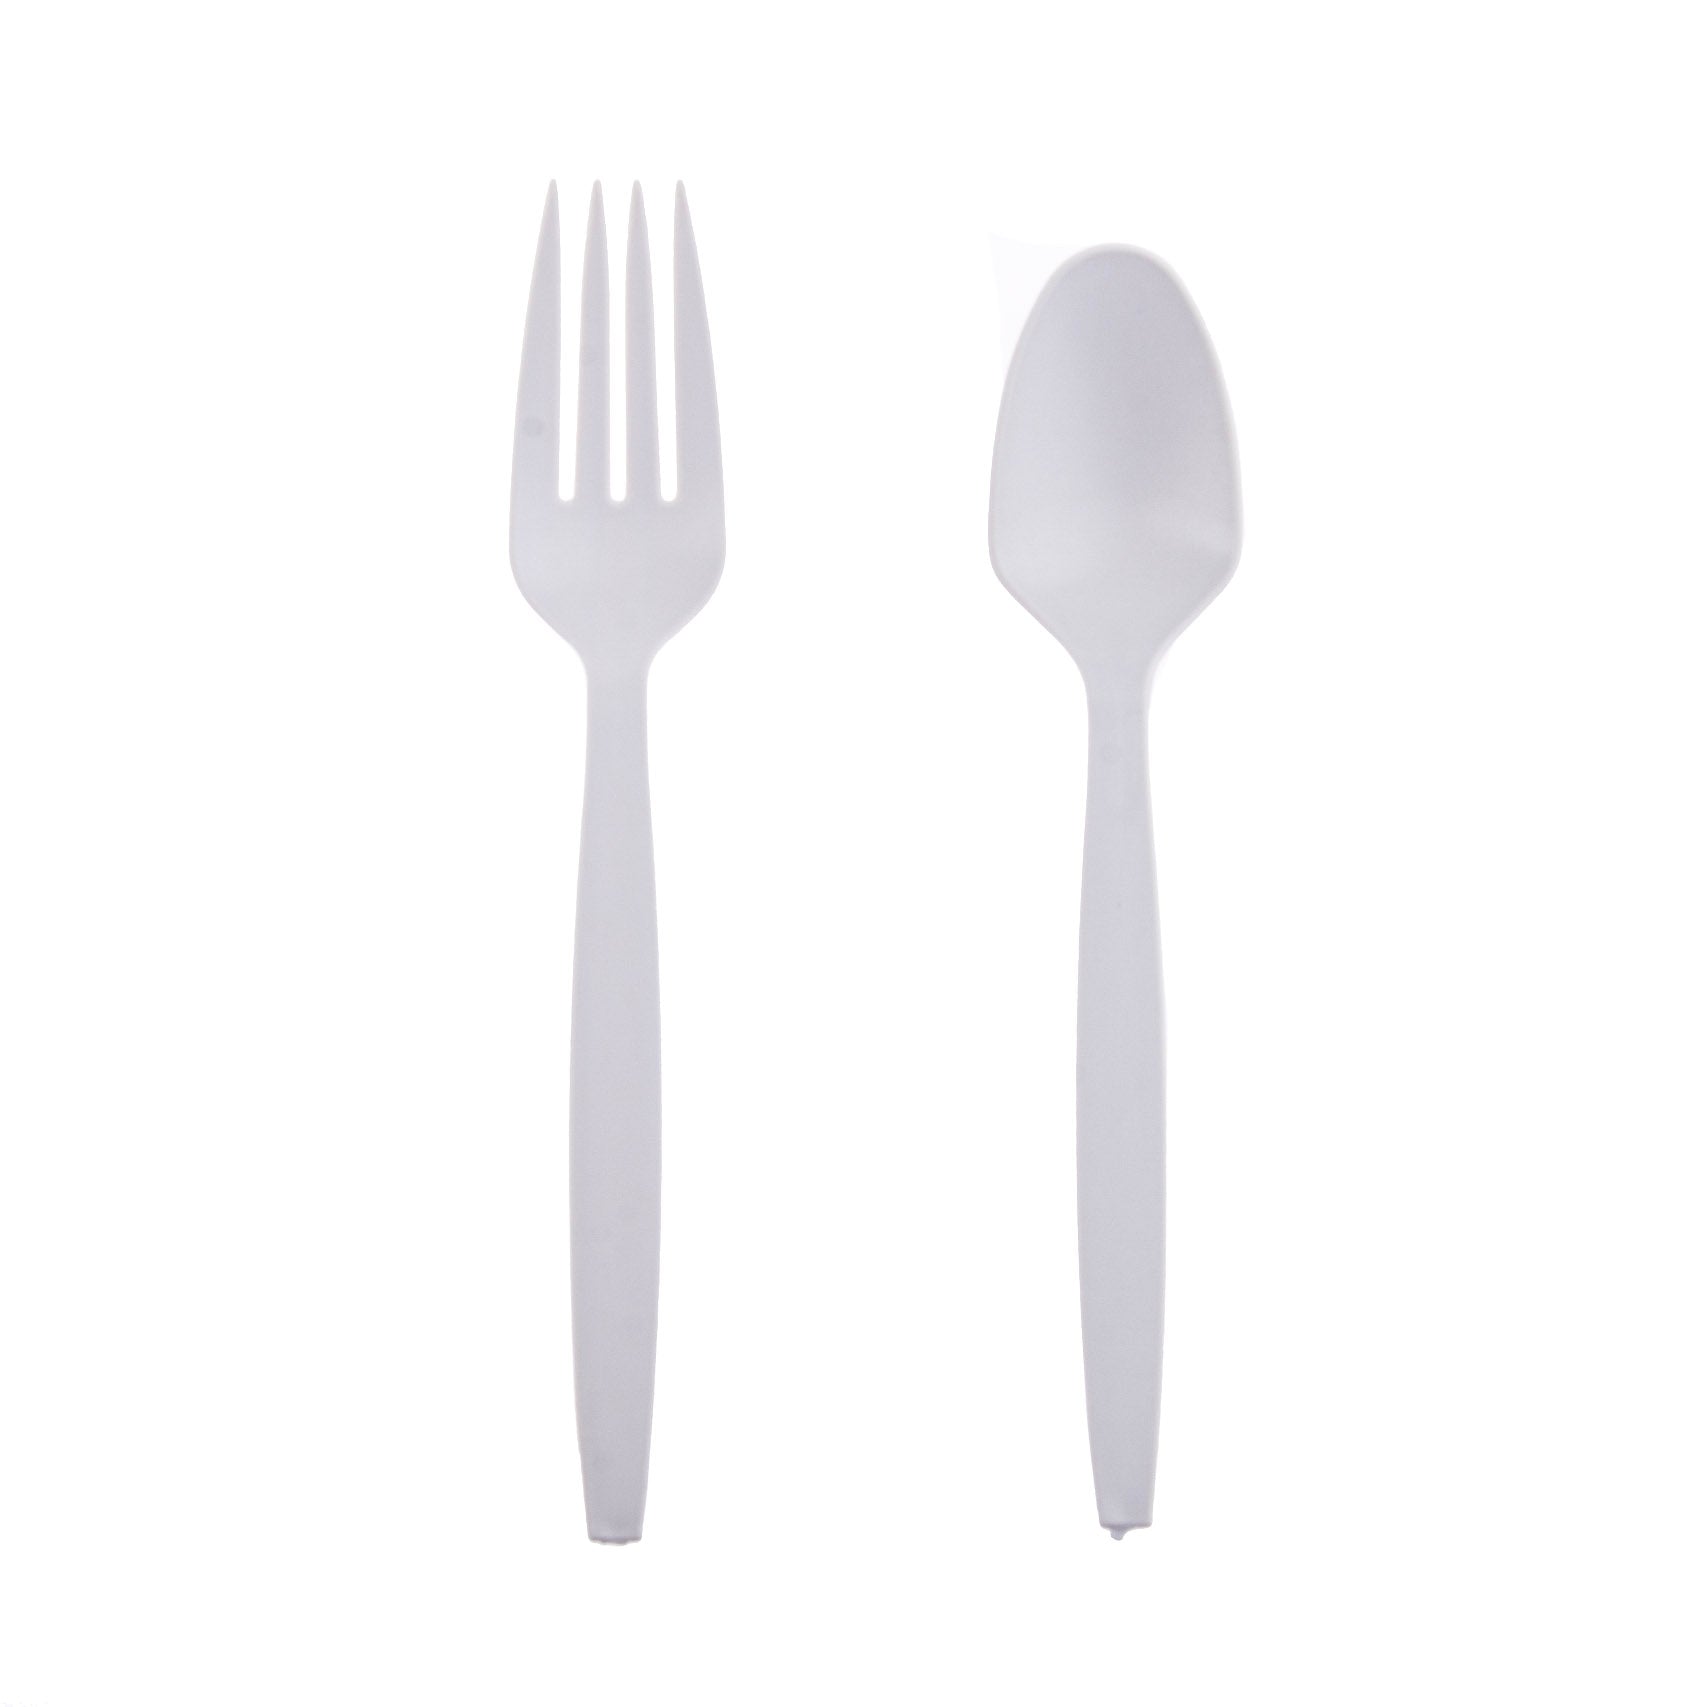 Cheers Starch-based Cutleries Spoon & Fork 12 Pairs - Natural Color (1 Pack) TPH